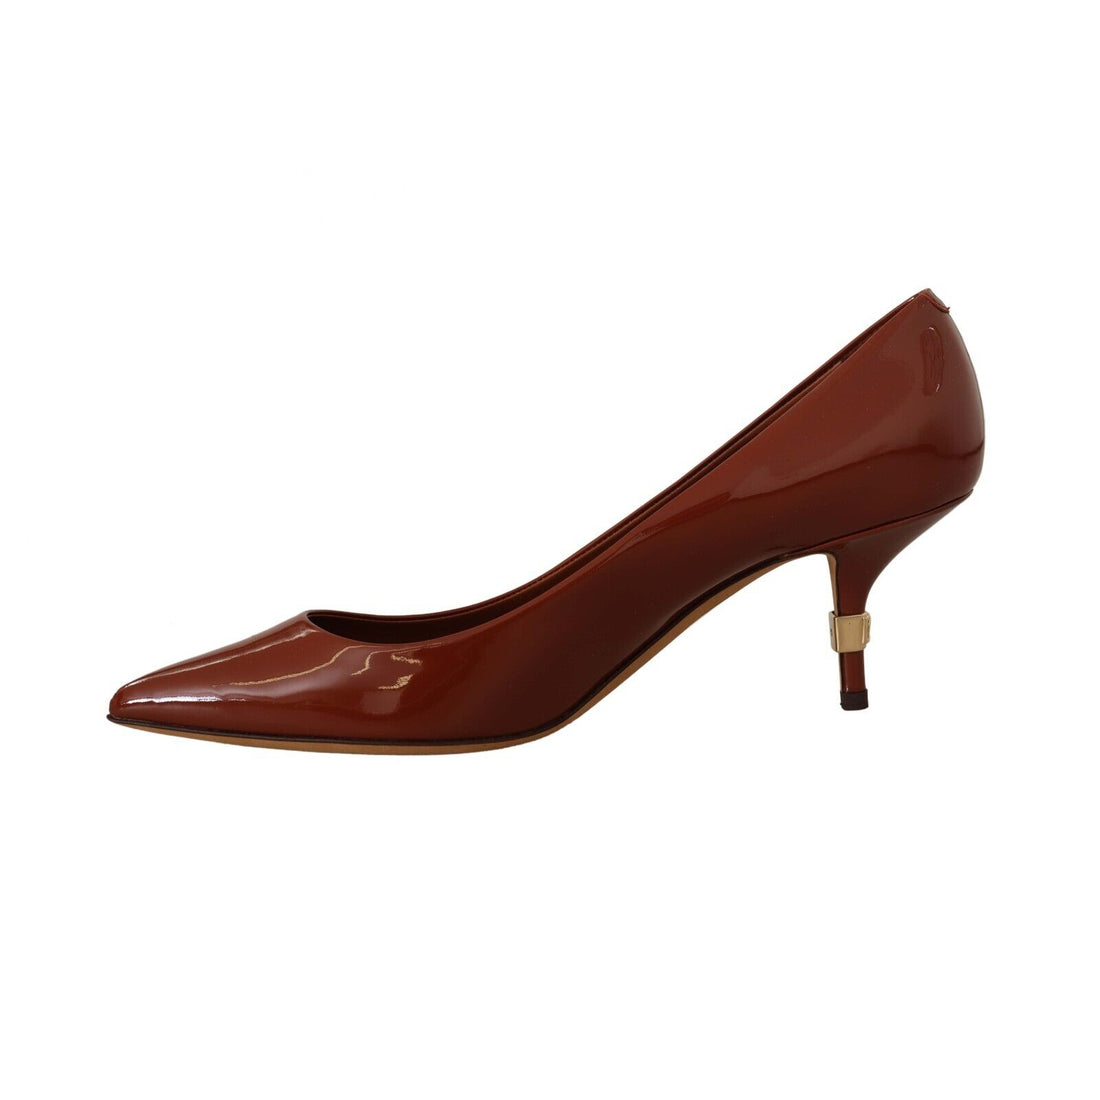 Dolce & Gabbana Brown Kitten Heels Pumps Patent Leather Shoes